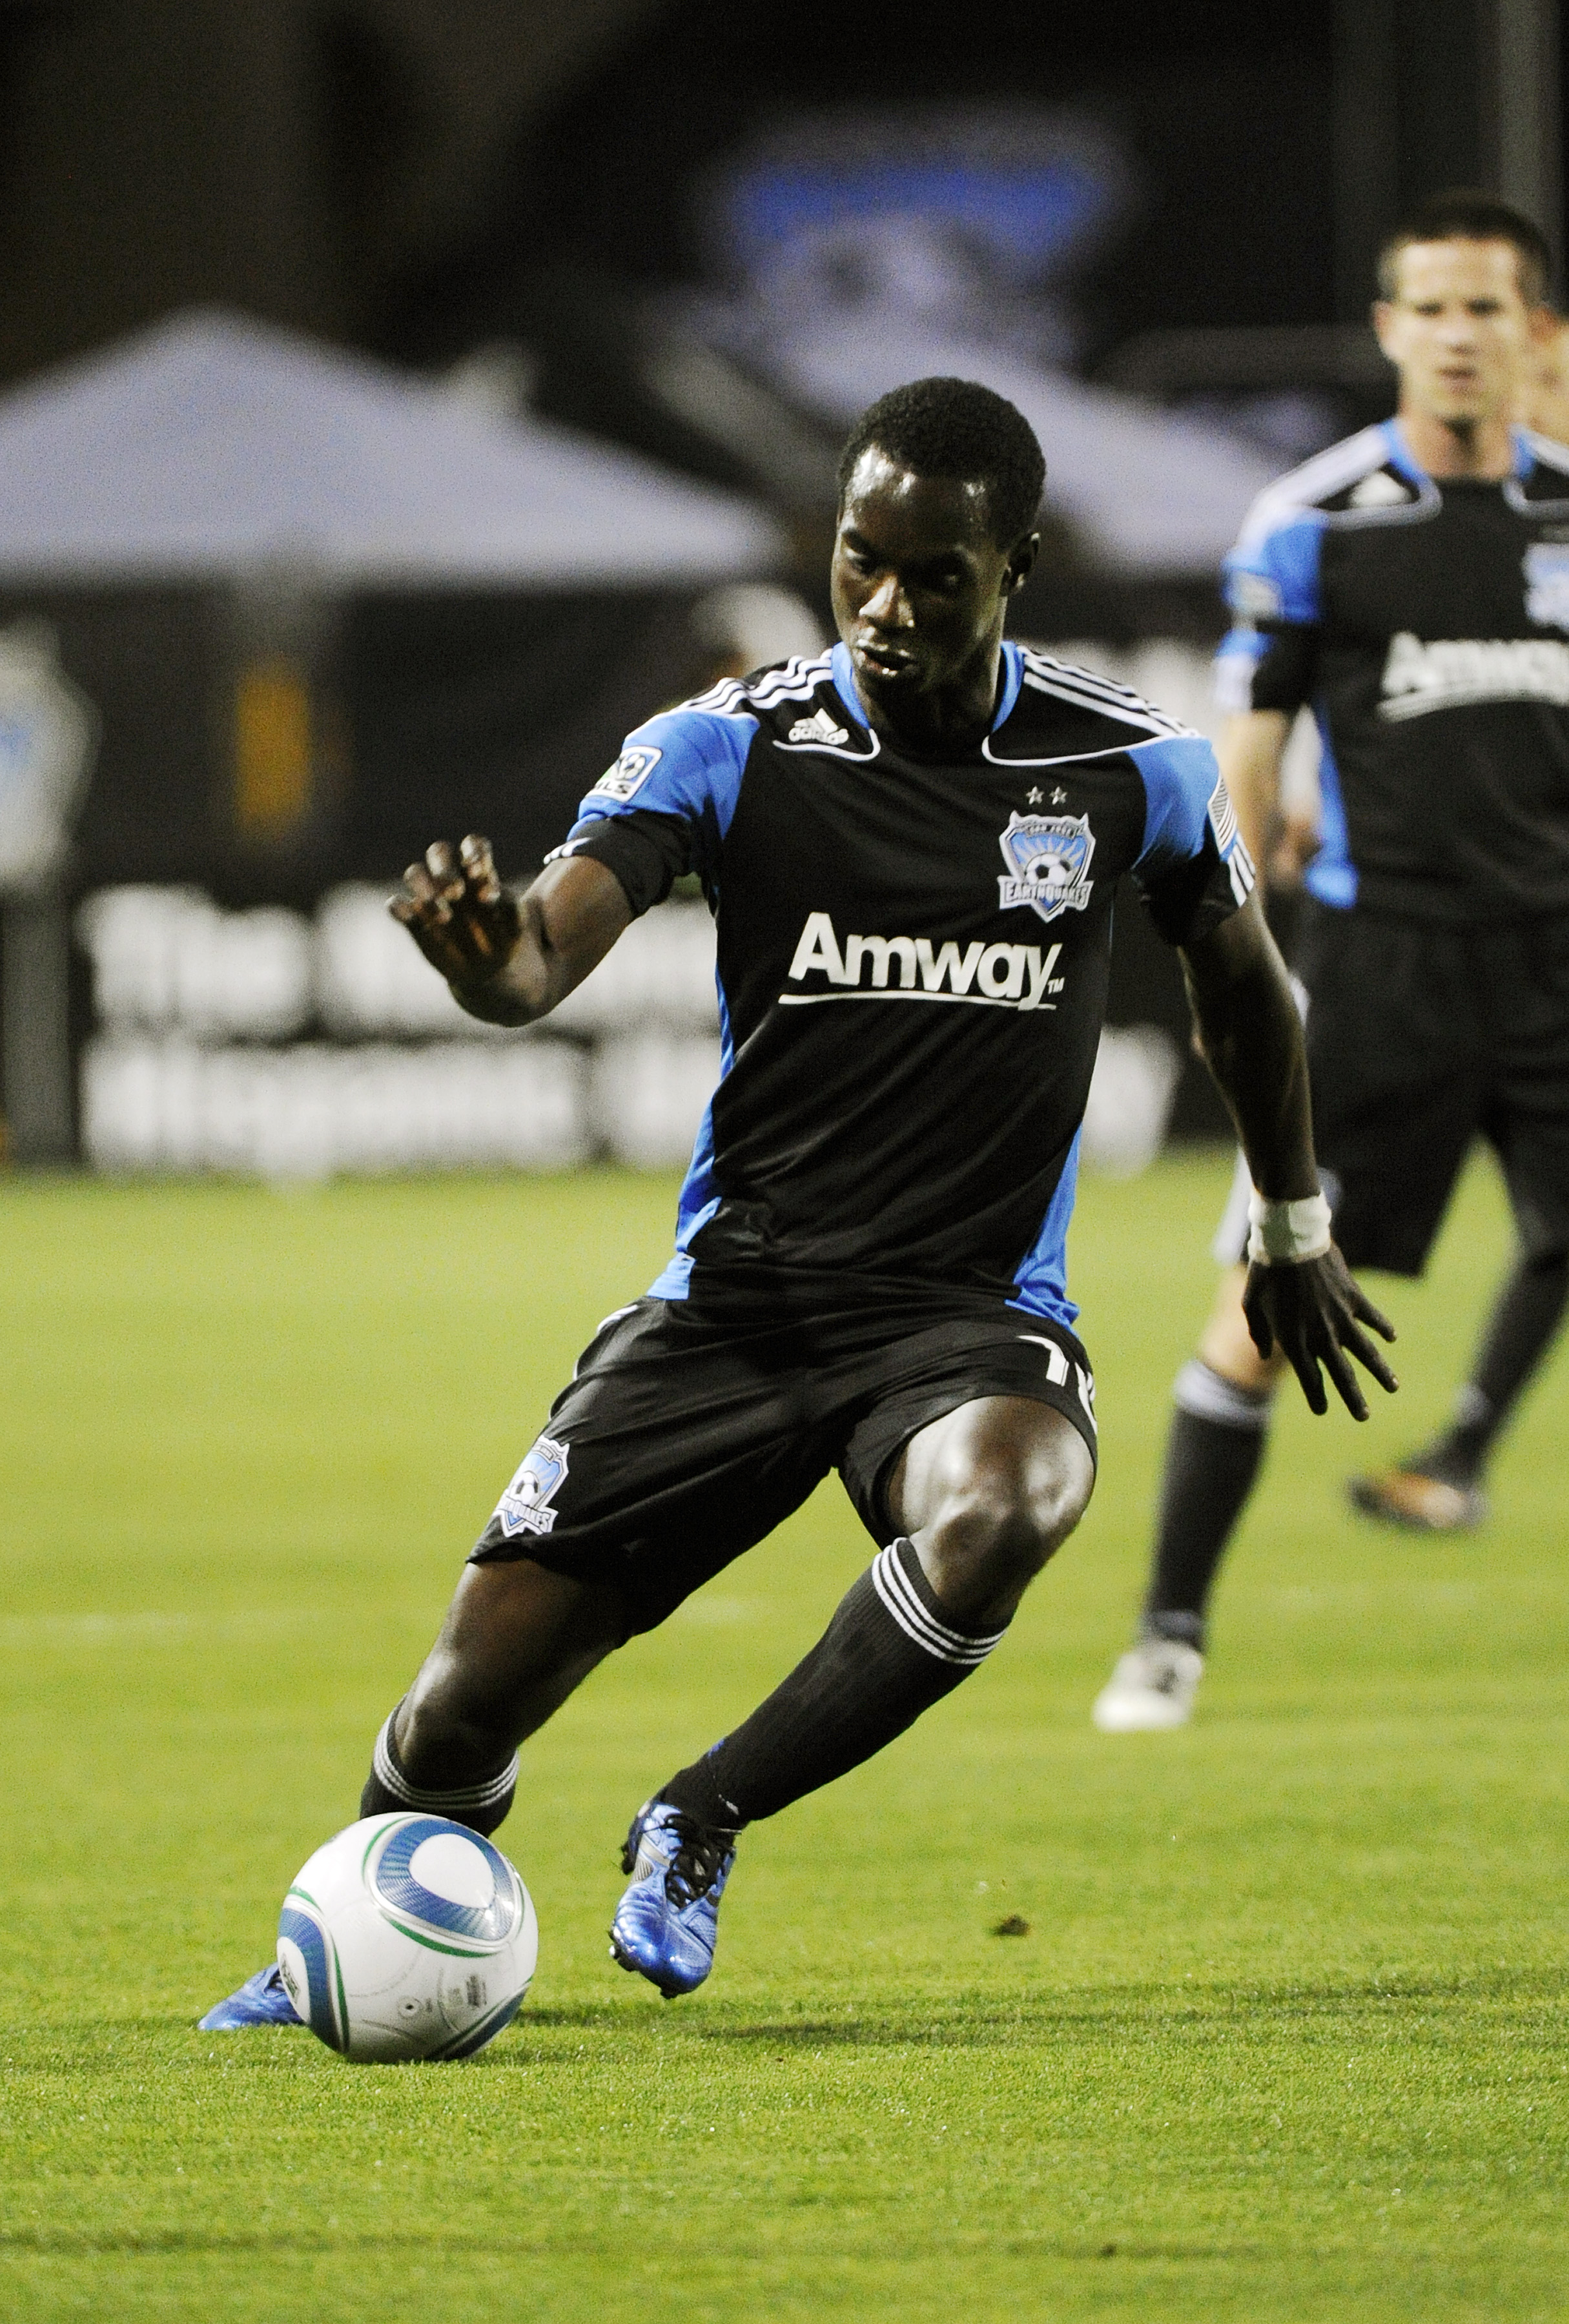 SANTA CLARA, CA - APRIL 2: Simon Dawkins #10 of the San Jose Earthquakes dribbles the ball against the Seattle Sounders FC during an MLS soccer game at Buck Shaw Stadium on April 2, 2011 in Santa Clara, California. The game ended in a 2-2 tie. (Photo by T